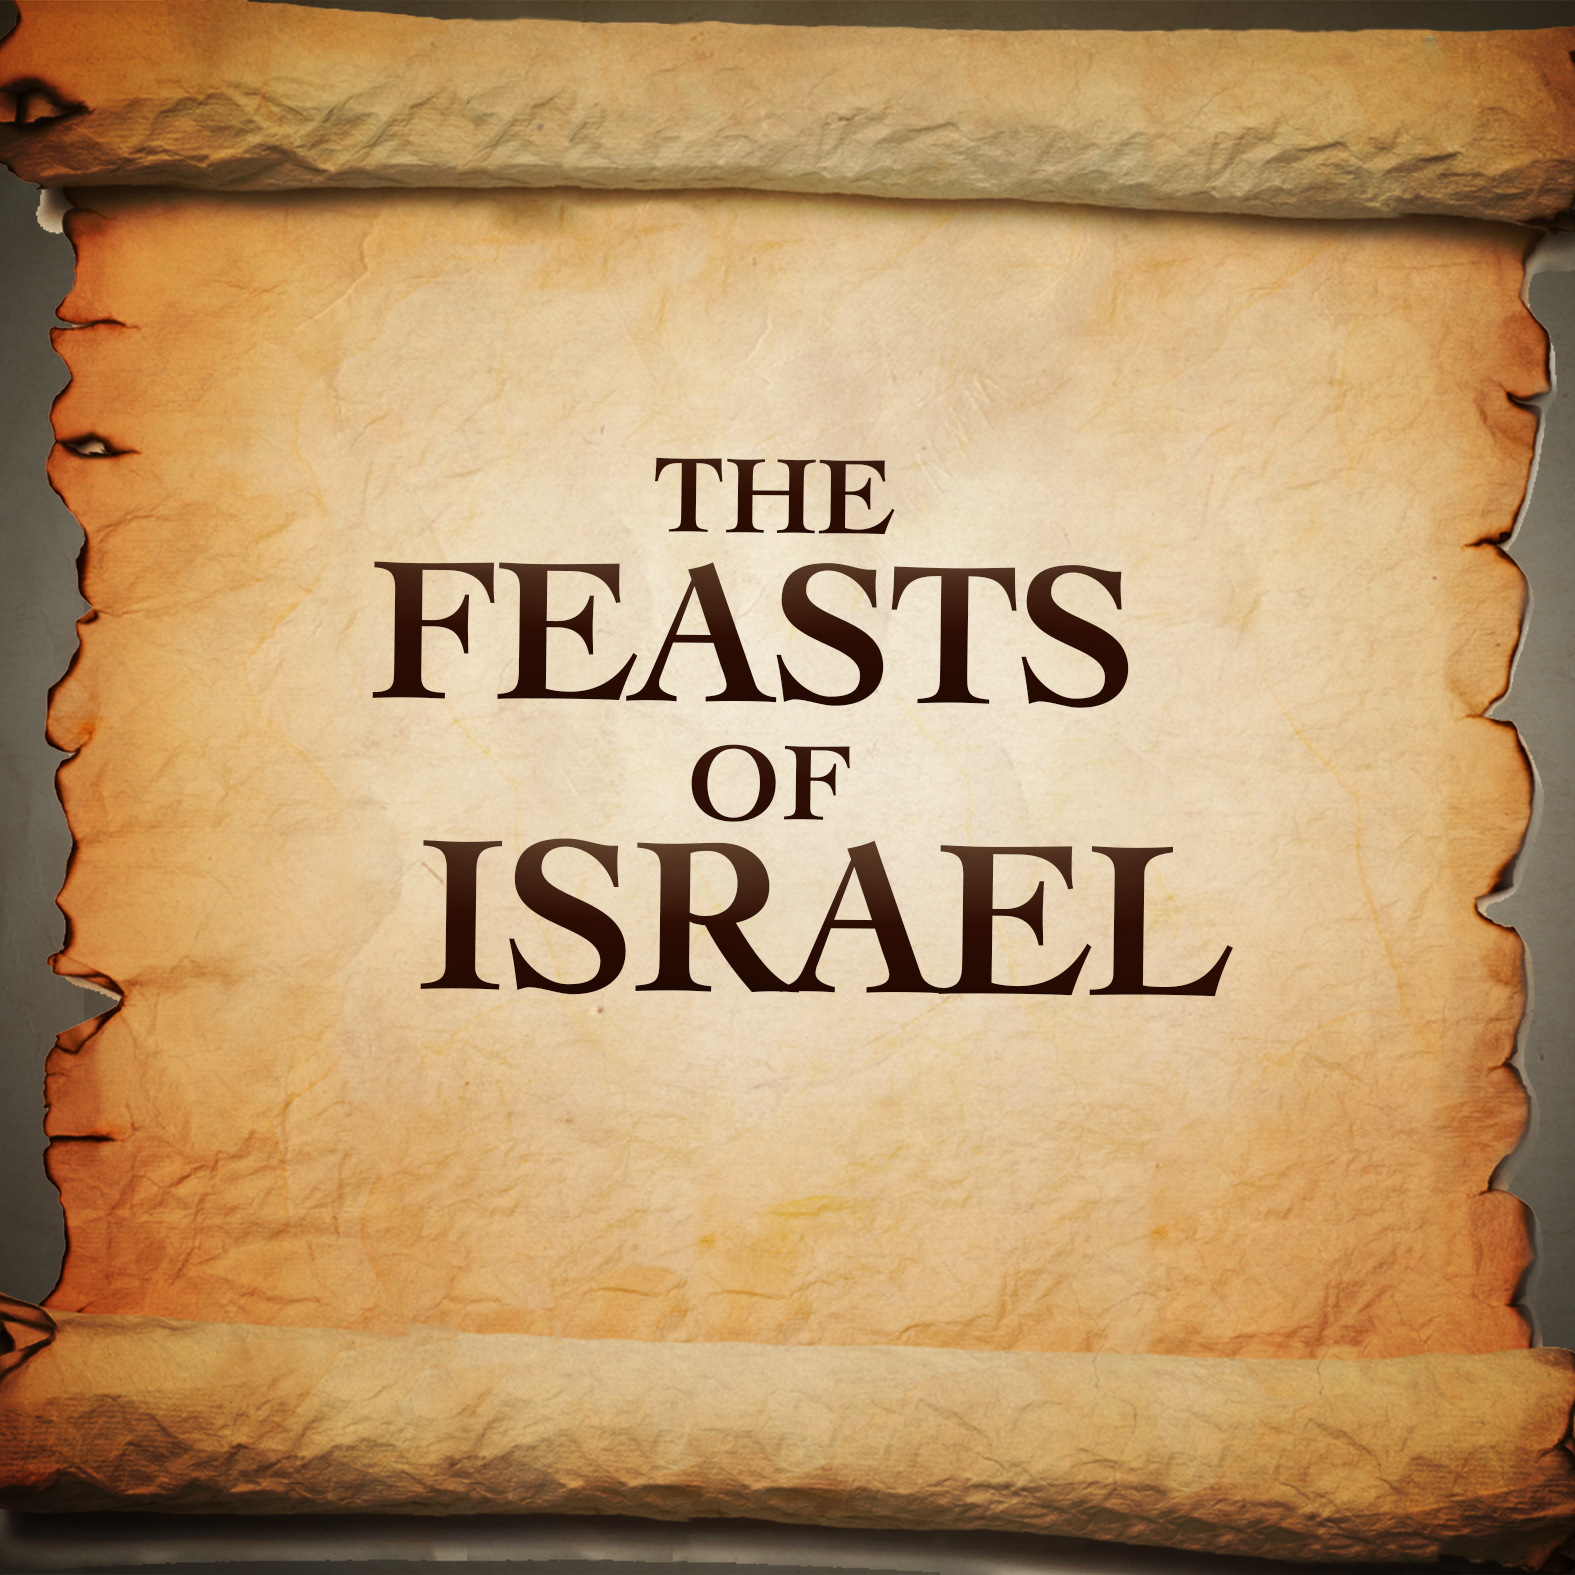 The Feasts of Israel, Part 4 - Unleavened Bread and First Fruits